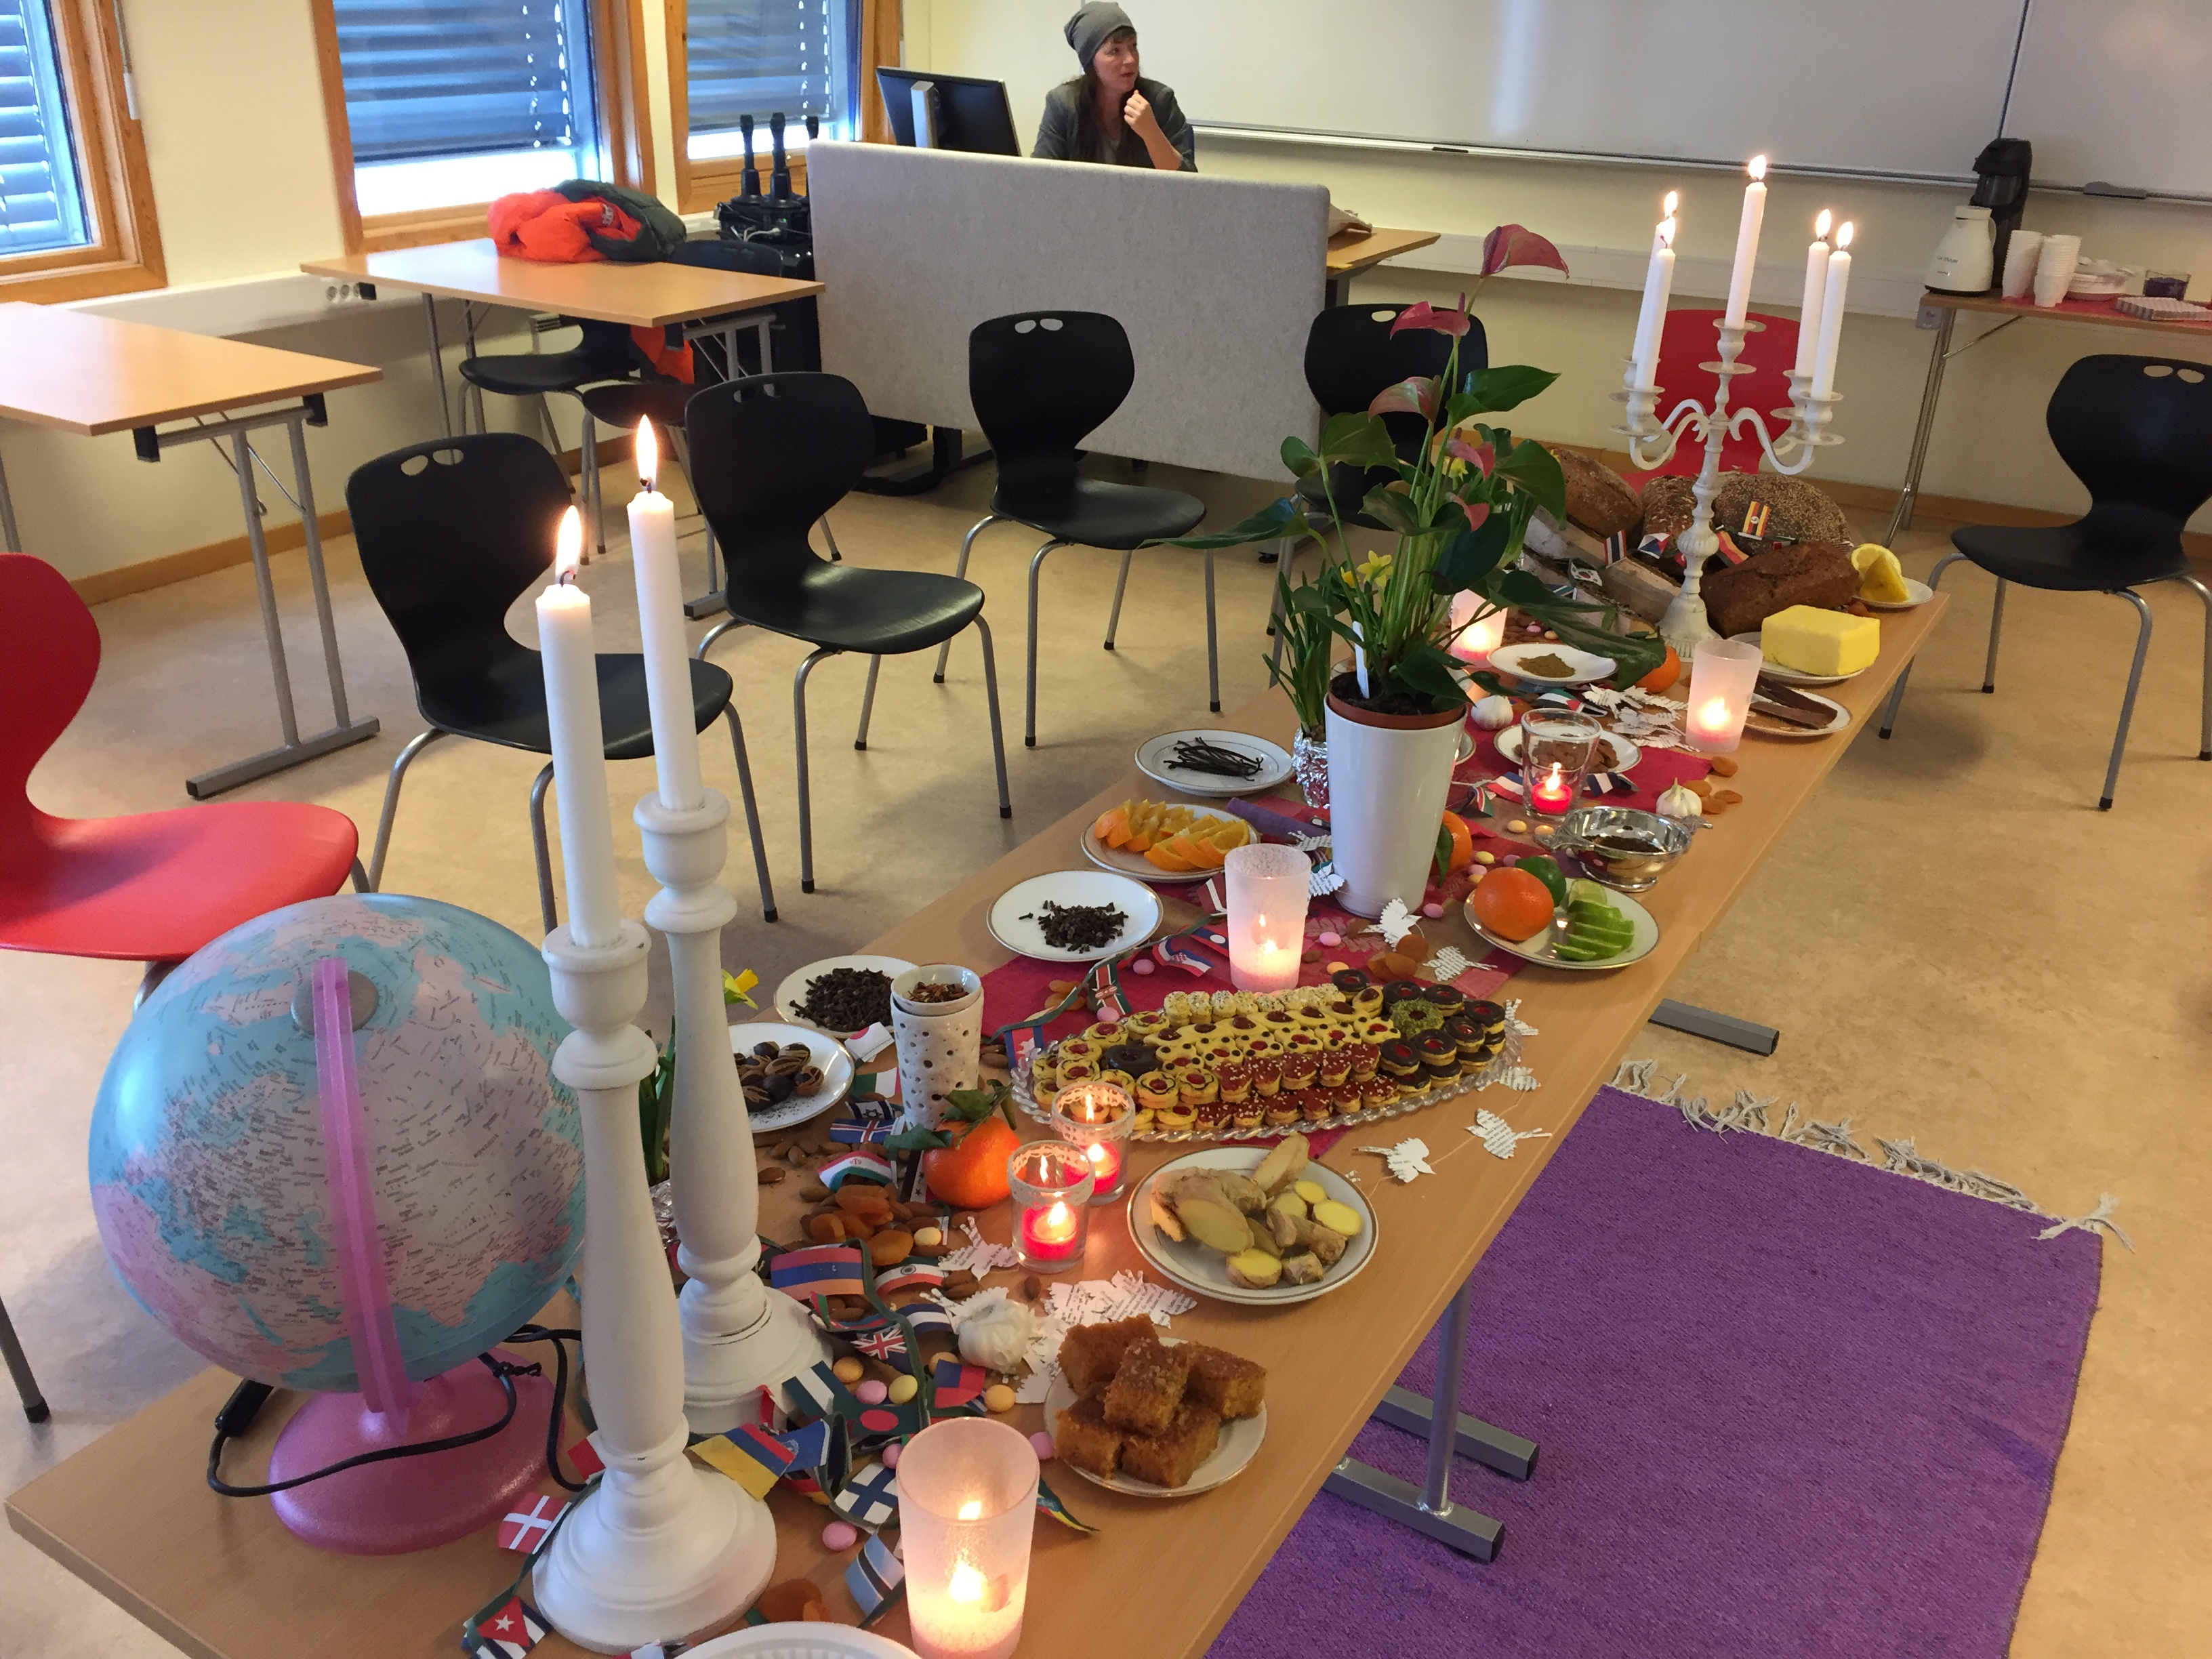 Associate Professor, Inger-Kjersti Lindvig had laid out an amazing table, with flowers, candles, food and spices to invite memories of taste and smell.